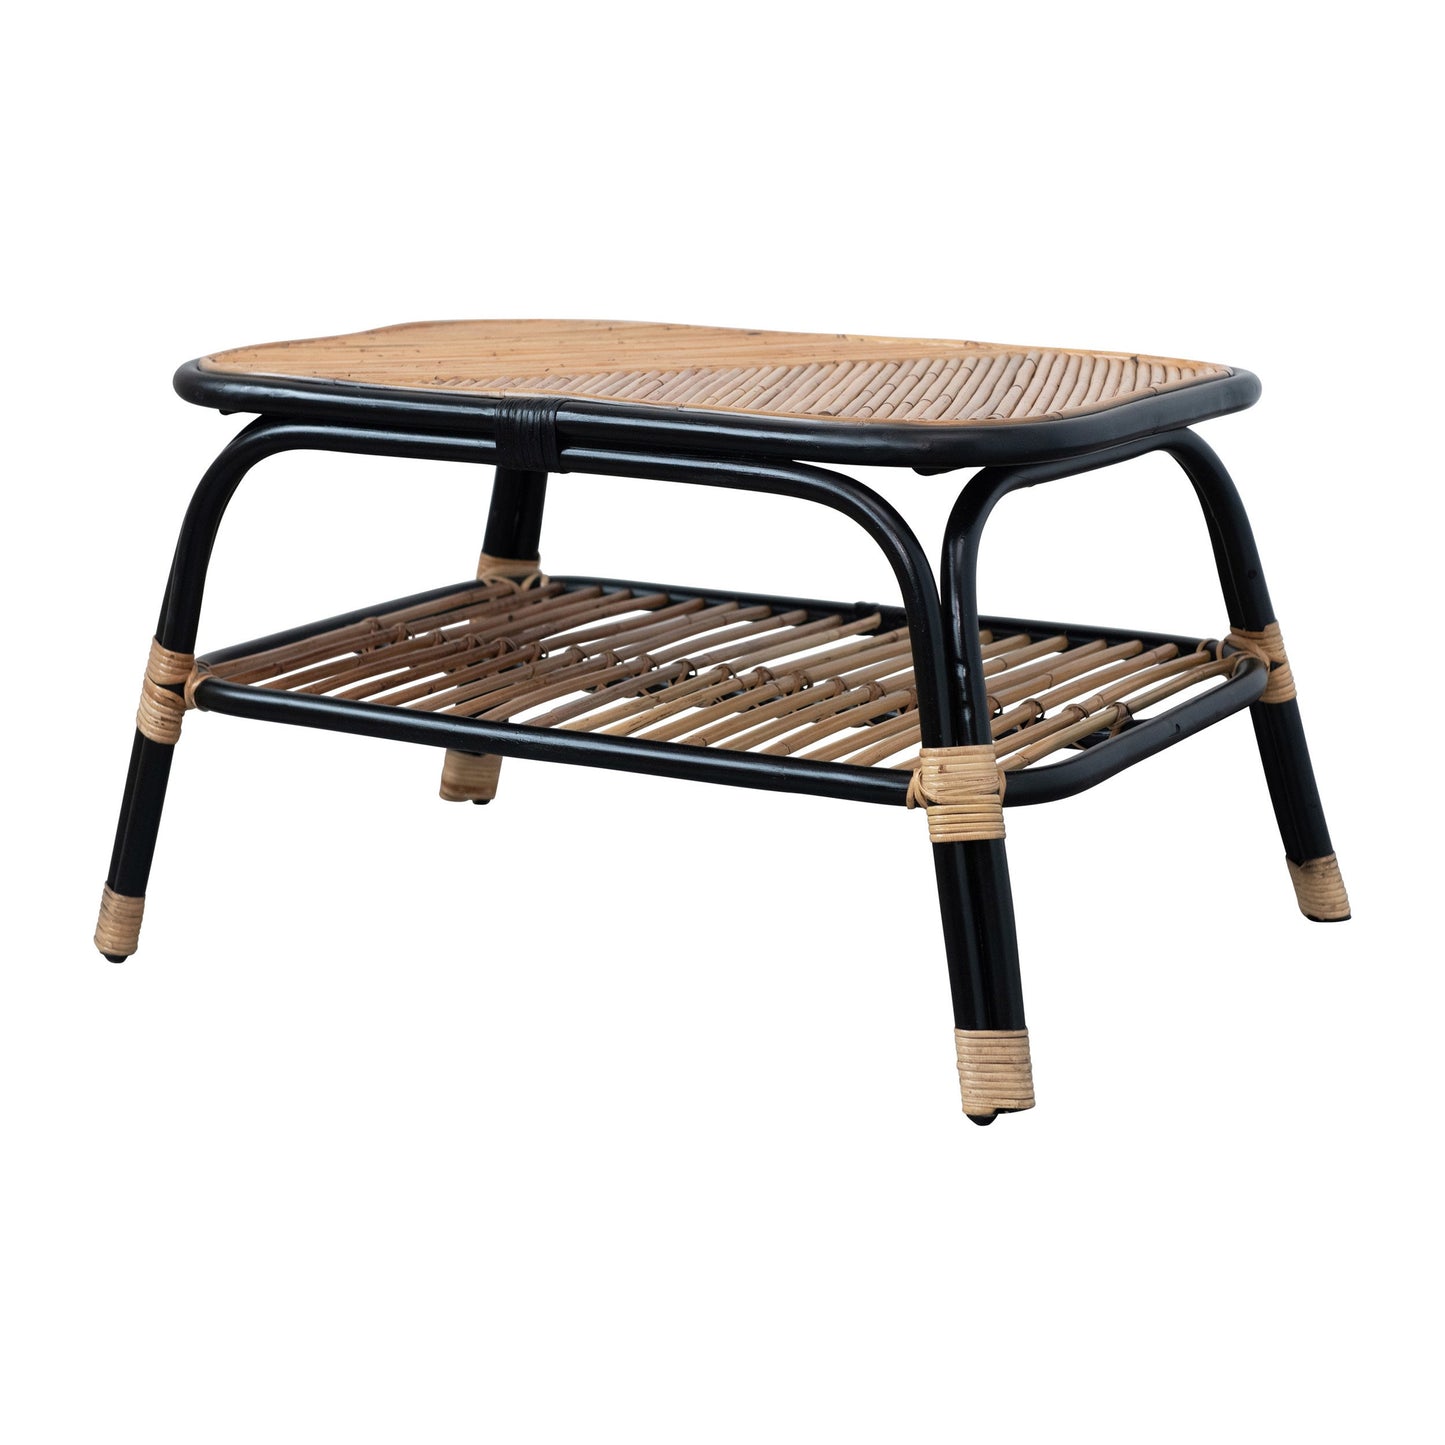 Hand-Woven Rattan Table with Shelf